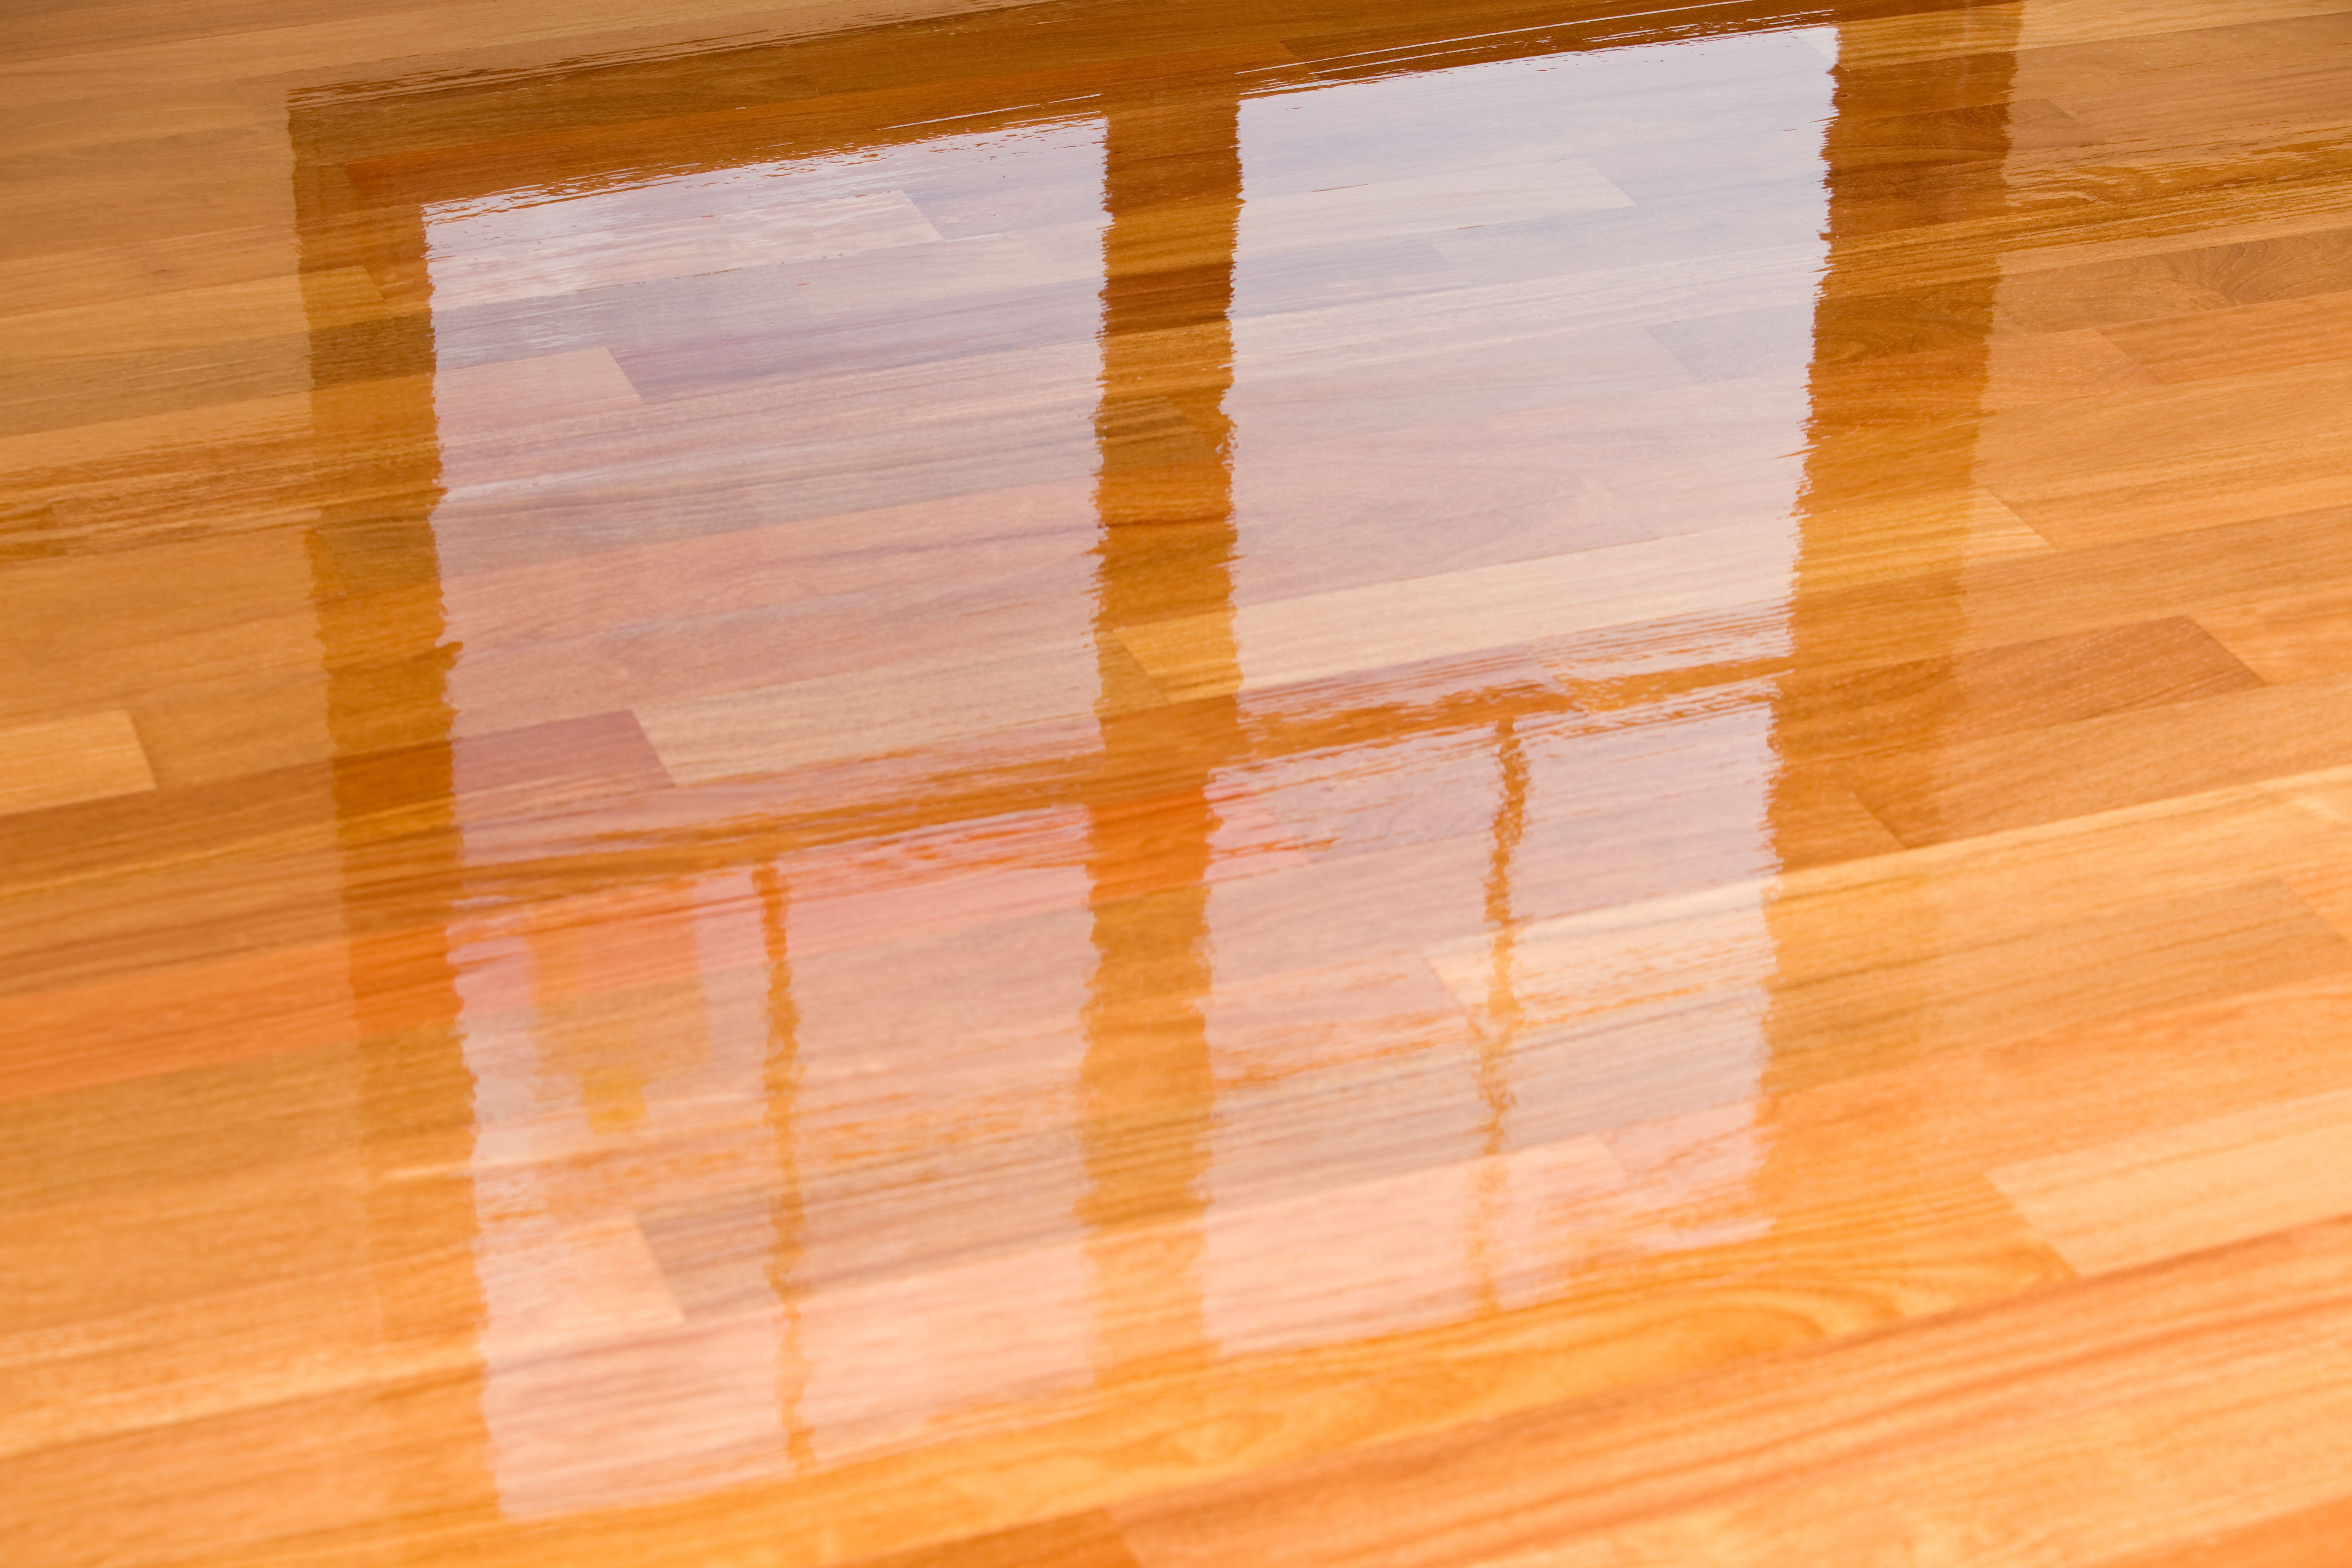 29 Lovely Hardwood Floor Repair Gaps In the Planks 2024 free download hardwood floor repair gaps in the planks of guide to laminate flooring water and damage repair with regard to wet polyurethane on new hardwood floor with window reflection 183846705 582e34da